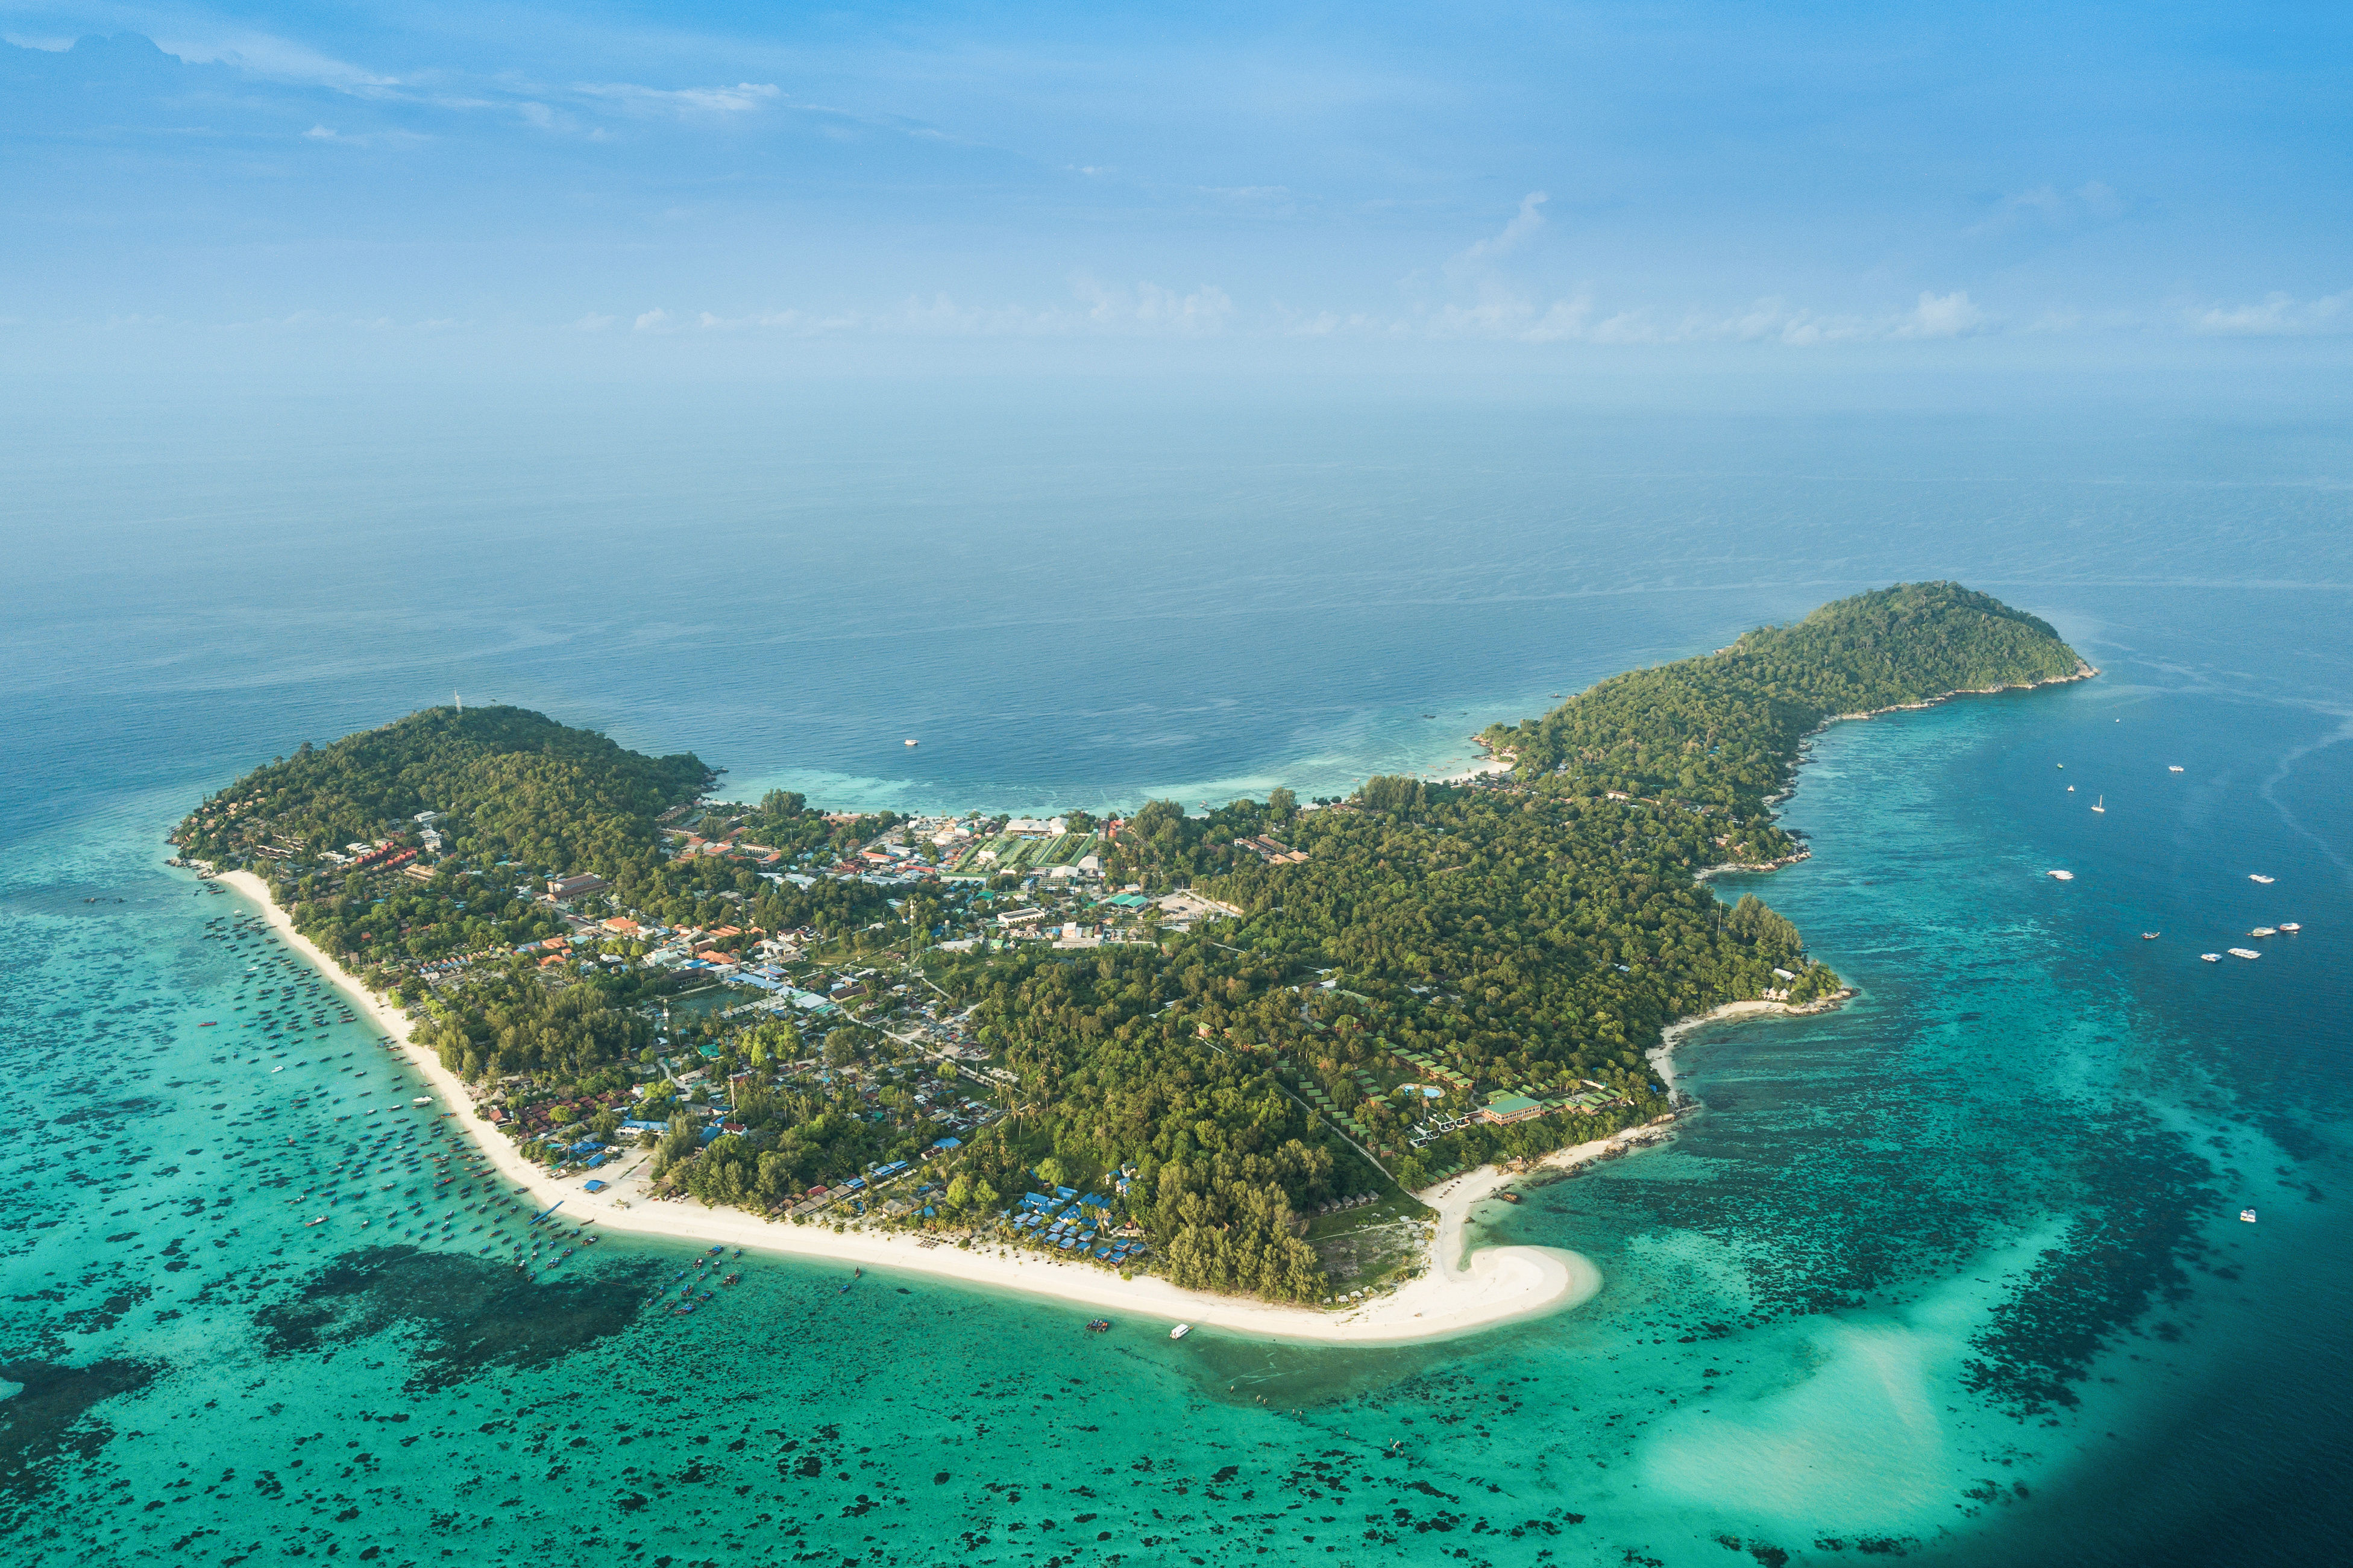 Aerial view of Koh Lipe island in Thailand fringed with white sand beaches and shallow reefs.